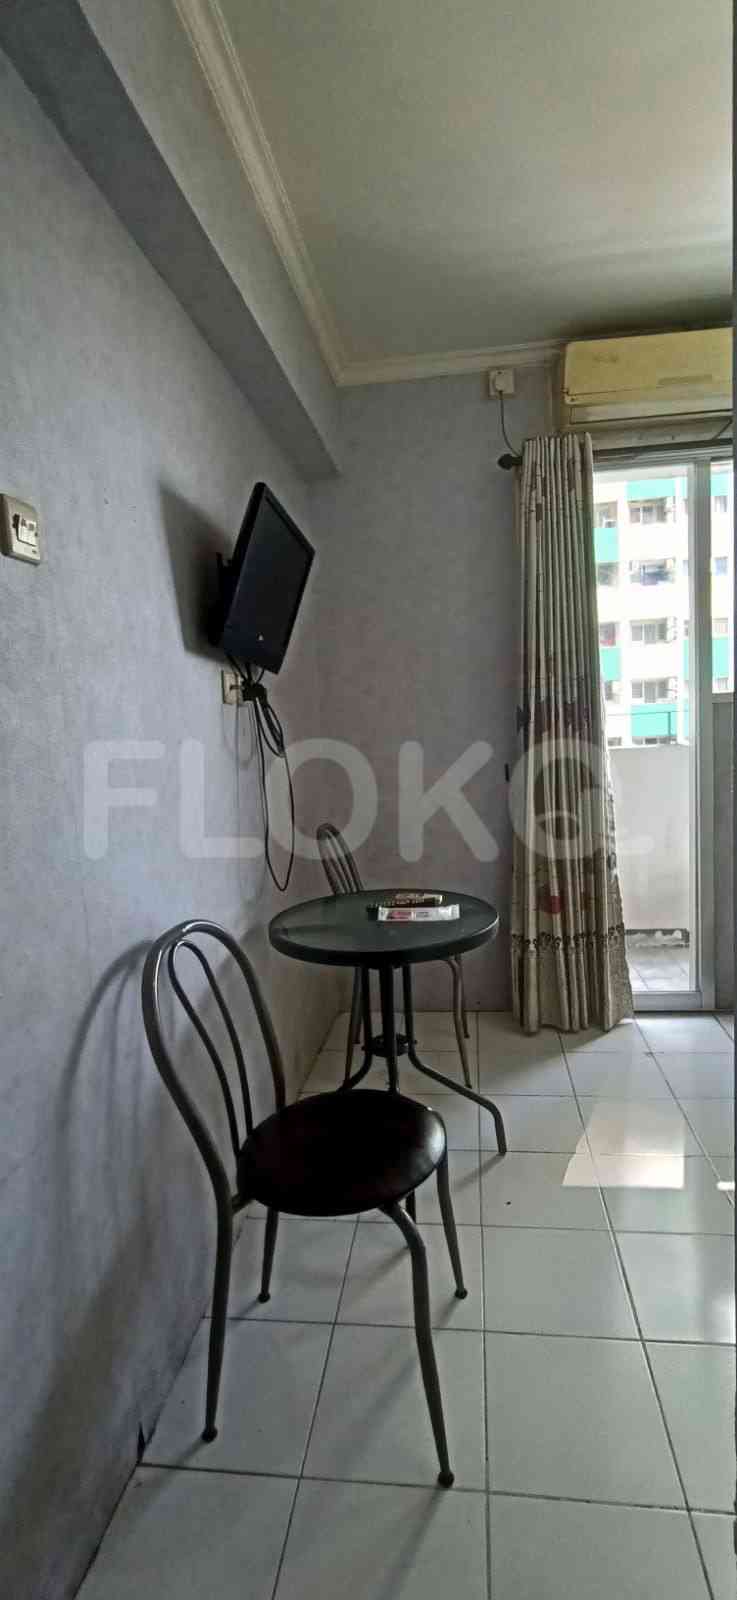 1 Bedroom on 7th Floor for Rent in Sentra Timur Residence - fca1ac 5